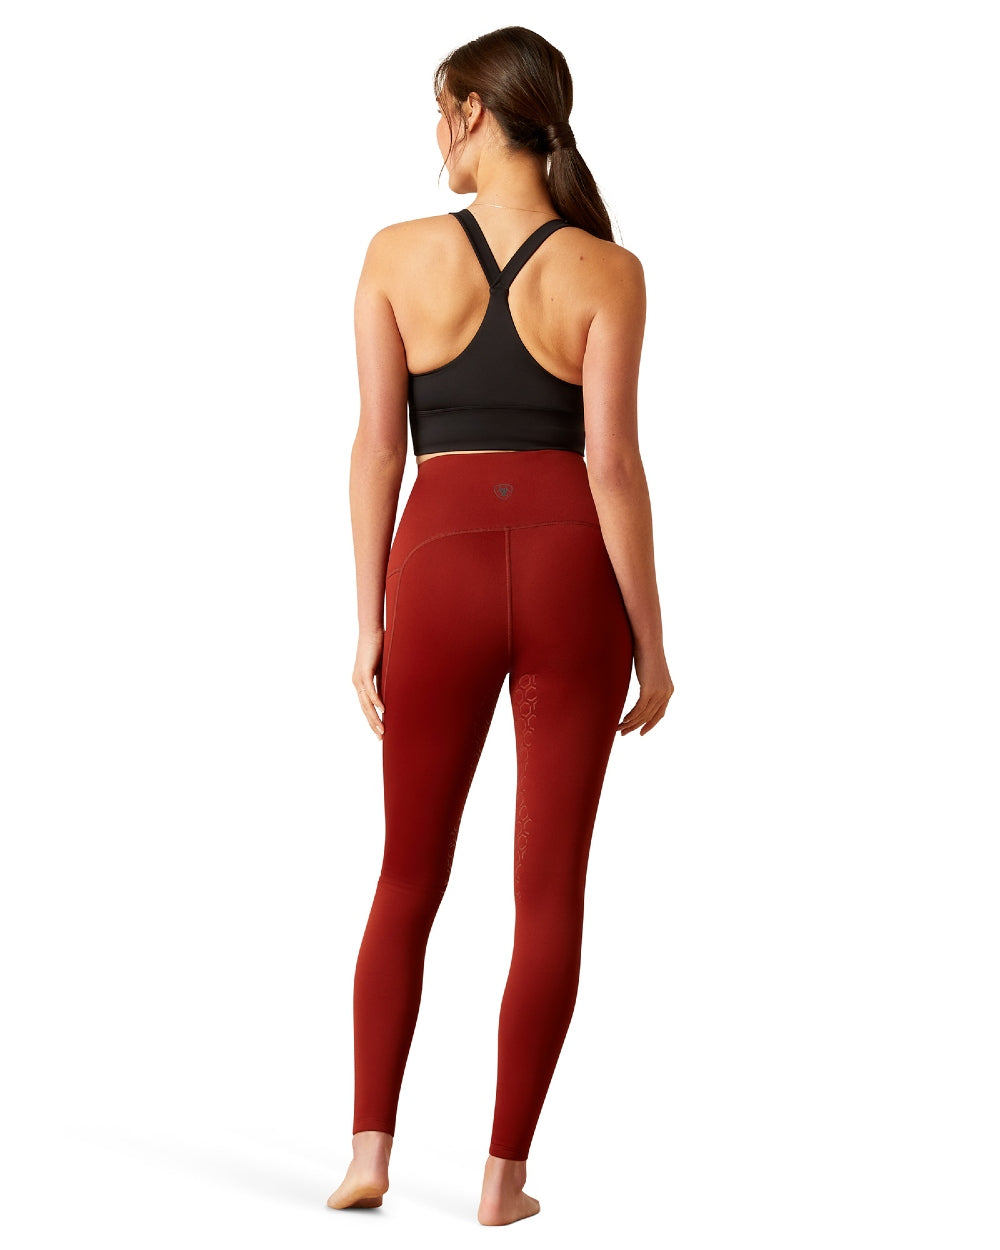 Ariat Womens Venture Thermal Half Grip Tights in Fired Brick 